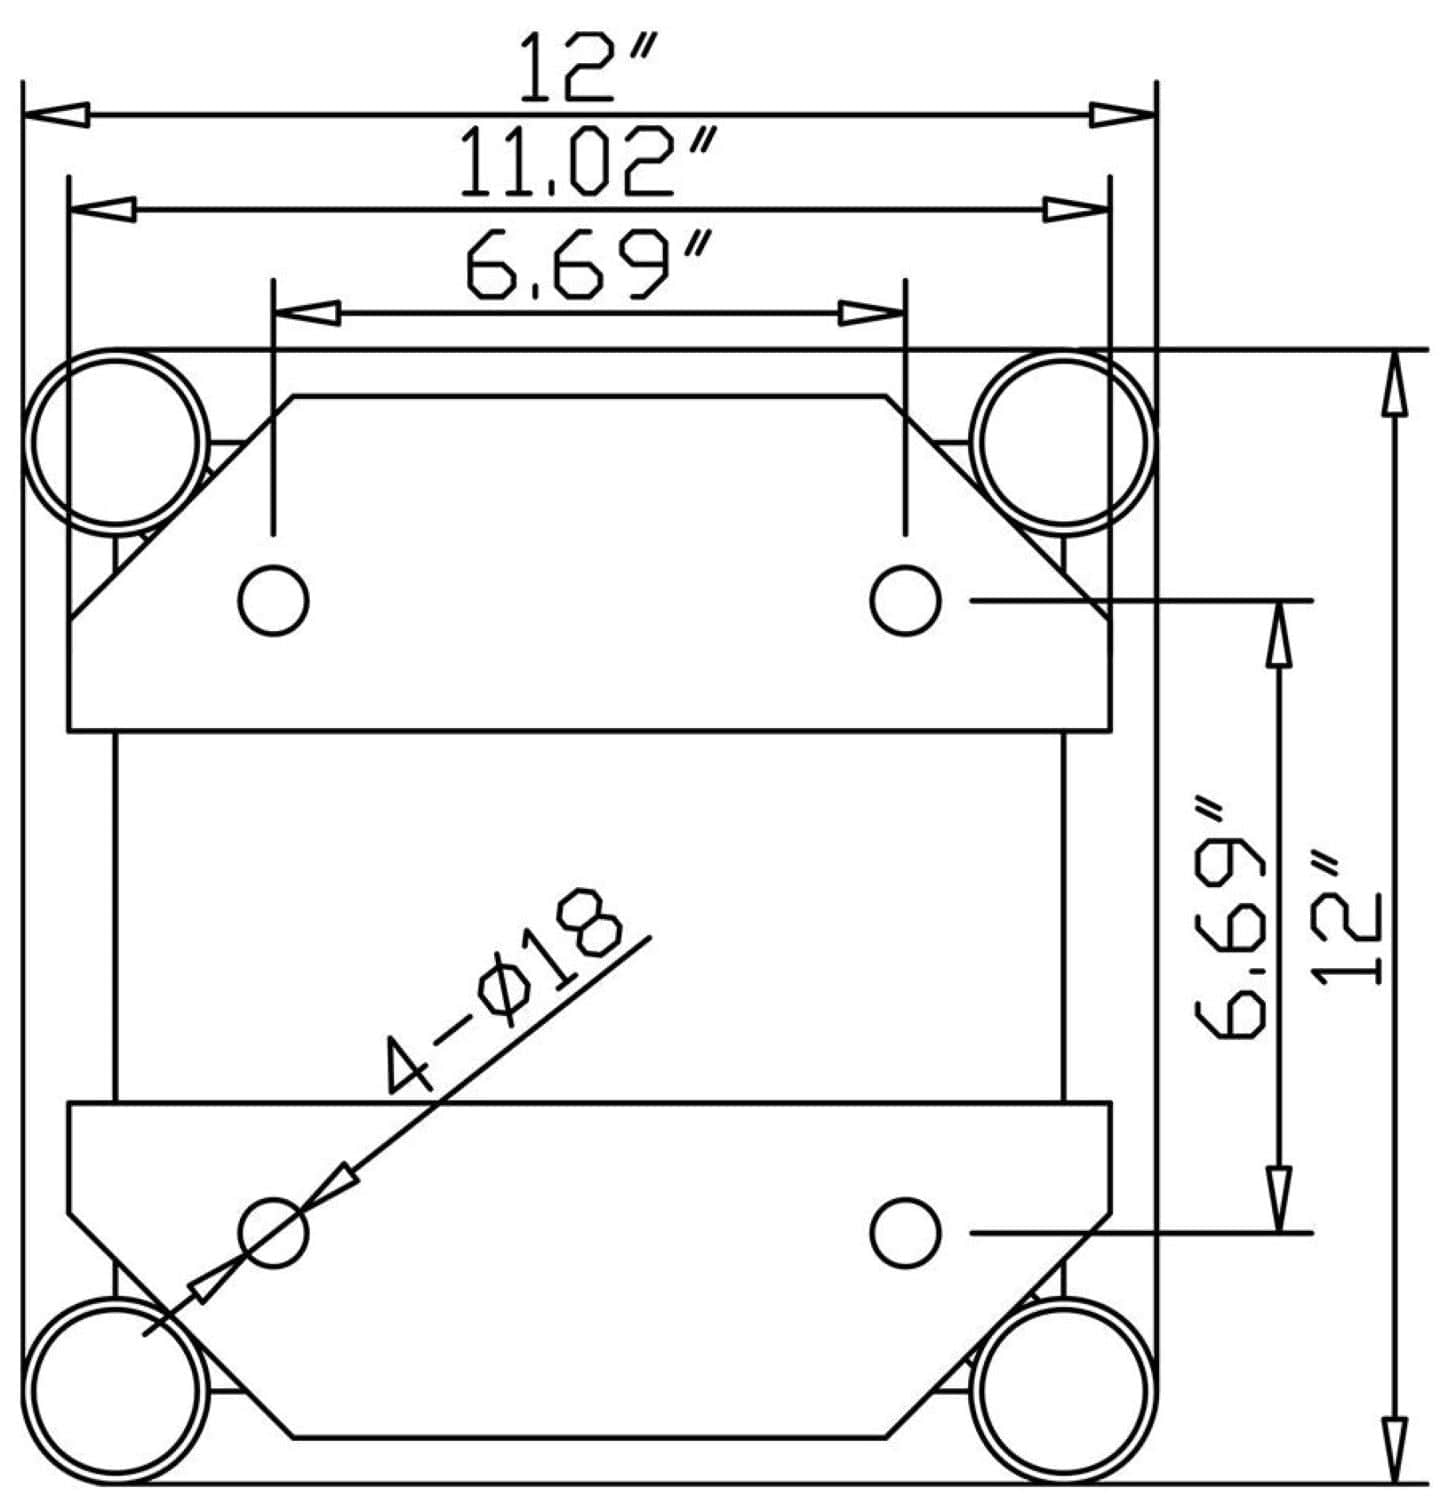 DuraTruss DT-GP30-30C 30-Foot End Plate Truss Circle - PSSL ProSound and Stage Lighting